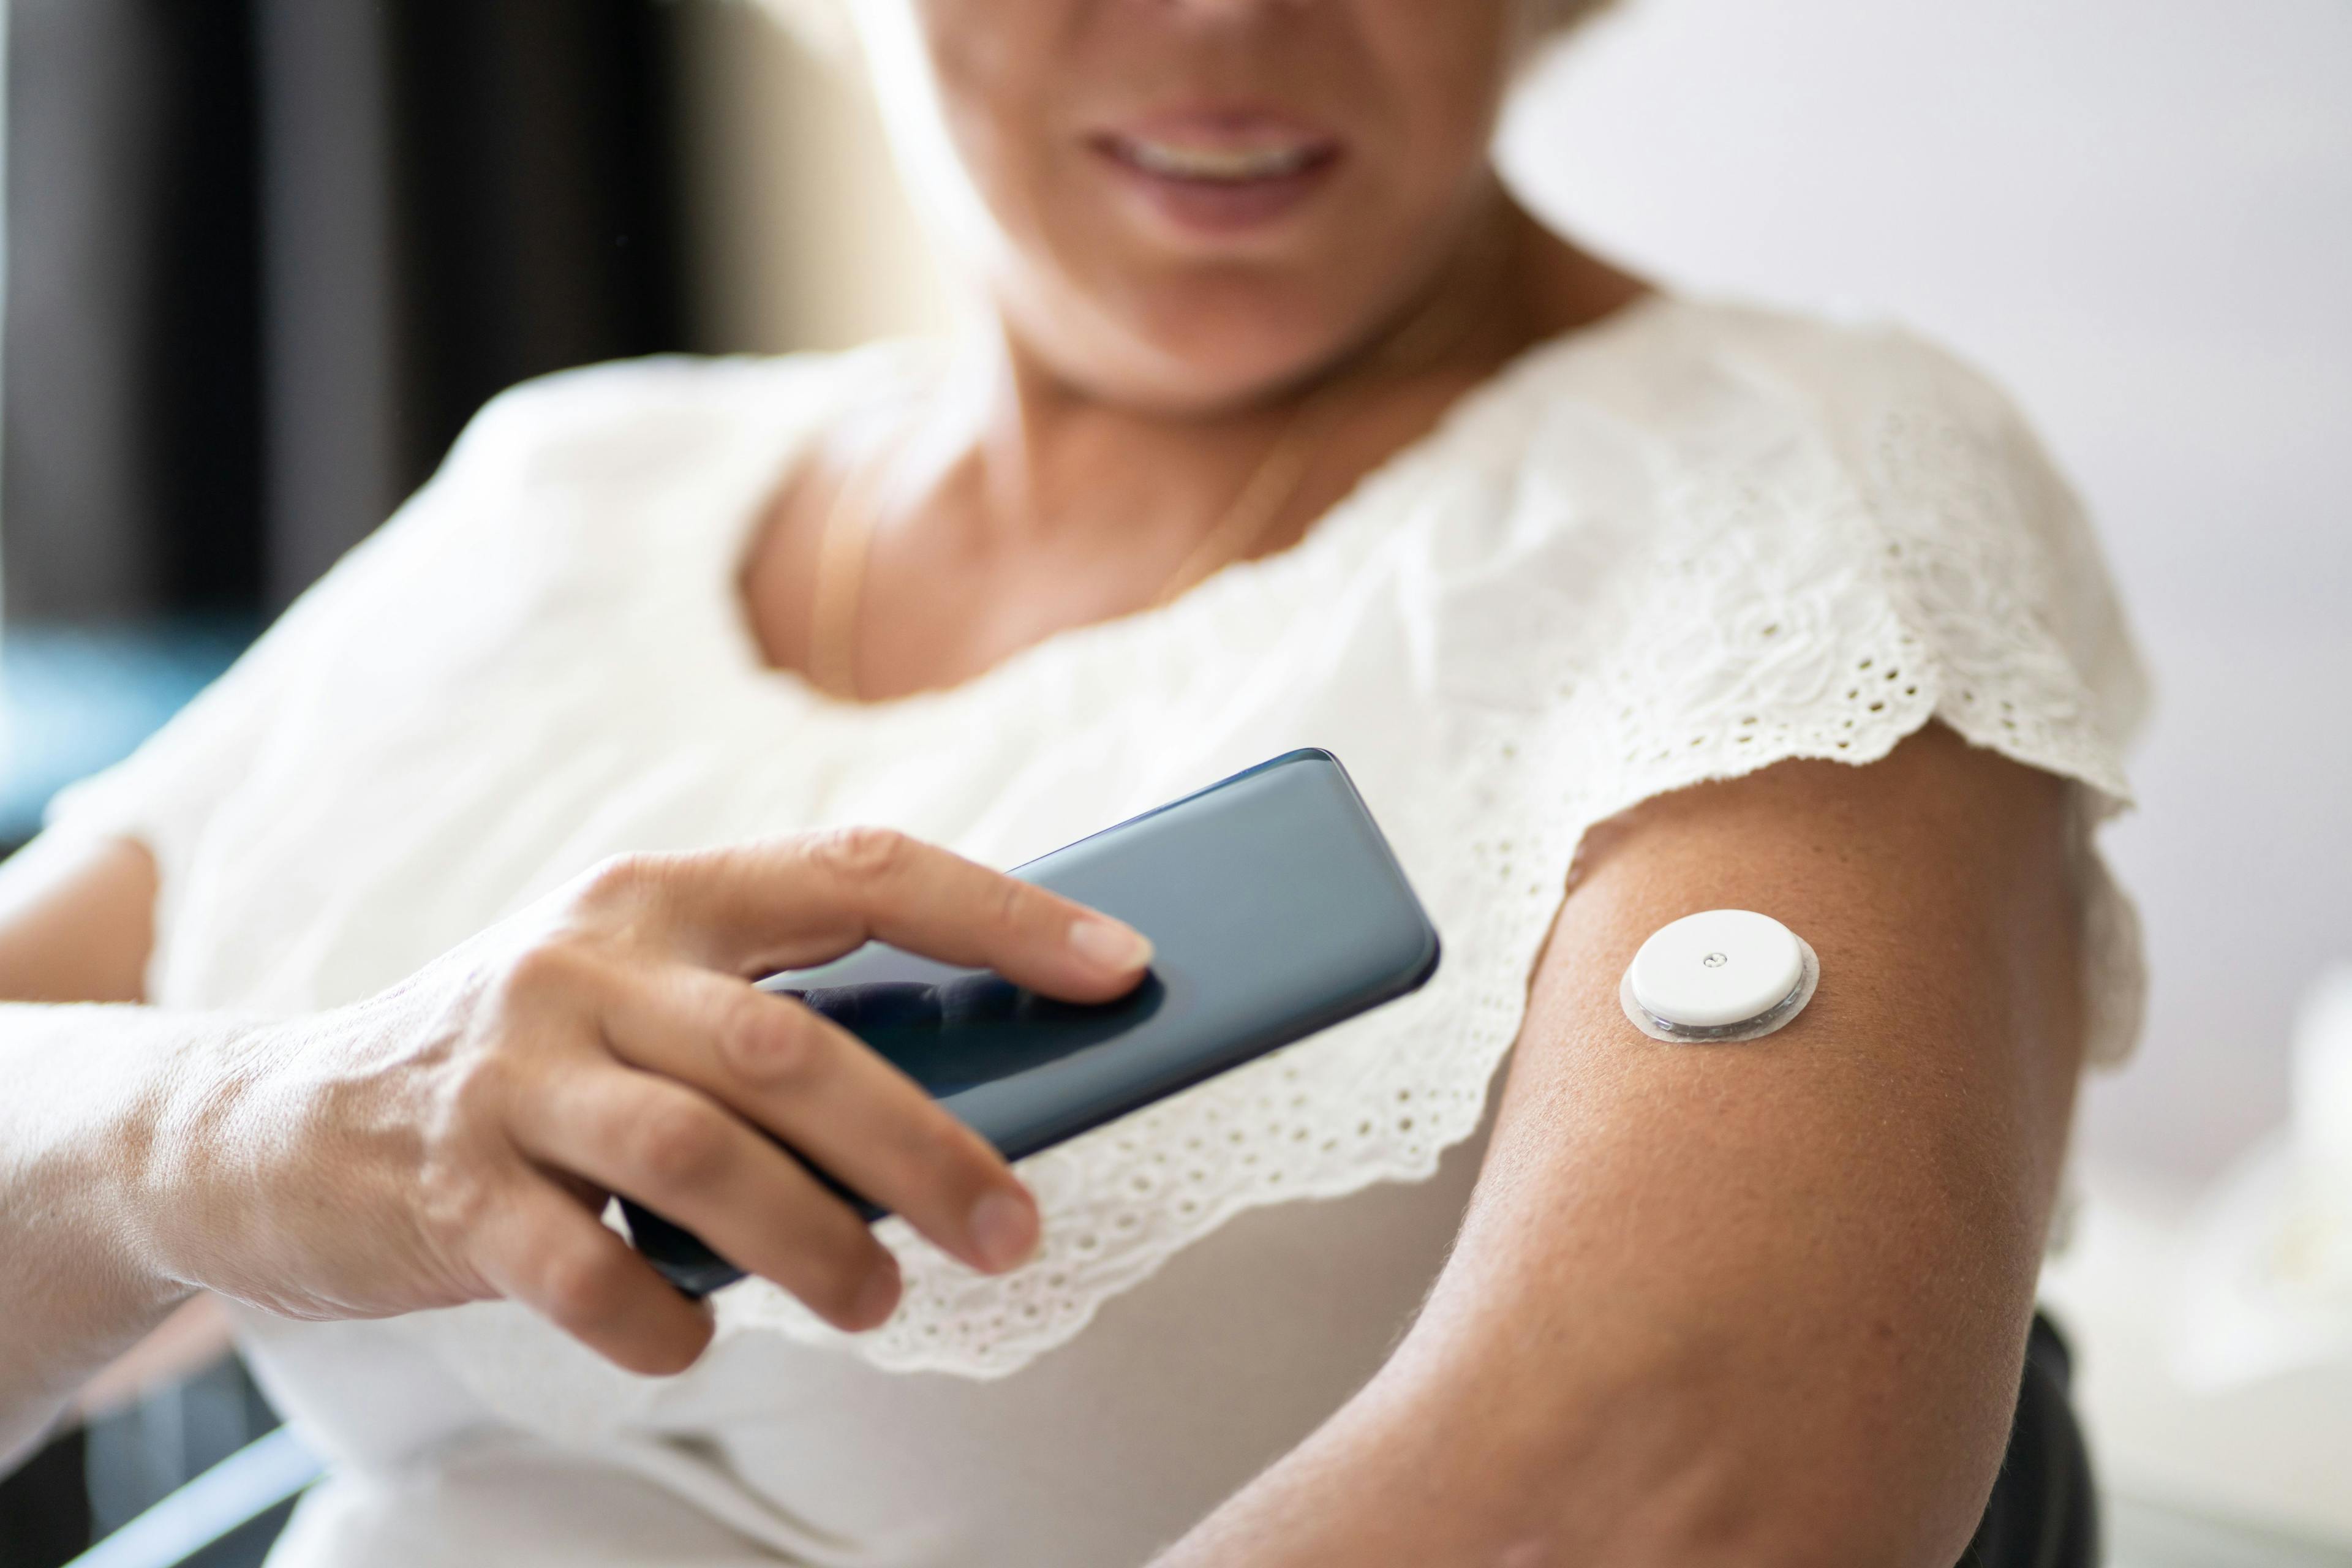 Patients With Type 1 Diabetes Not Achieving Glycemic Targets Despite Use of New Technology